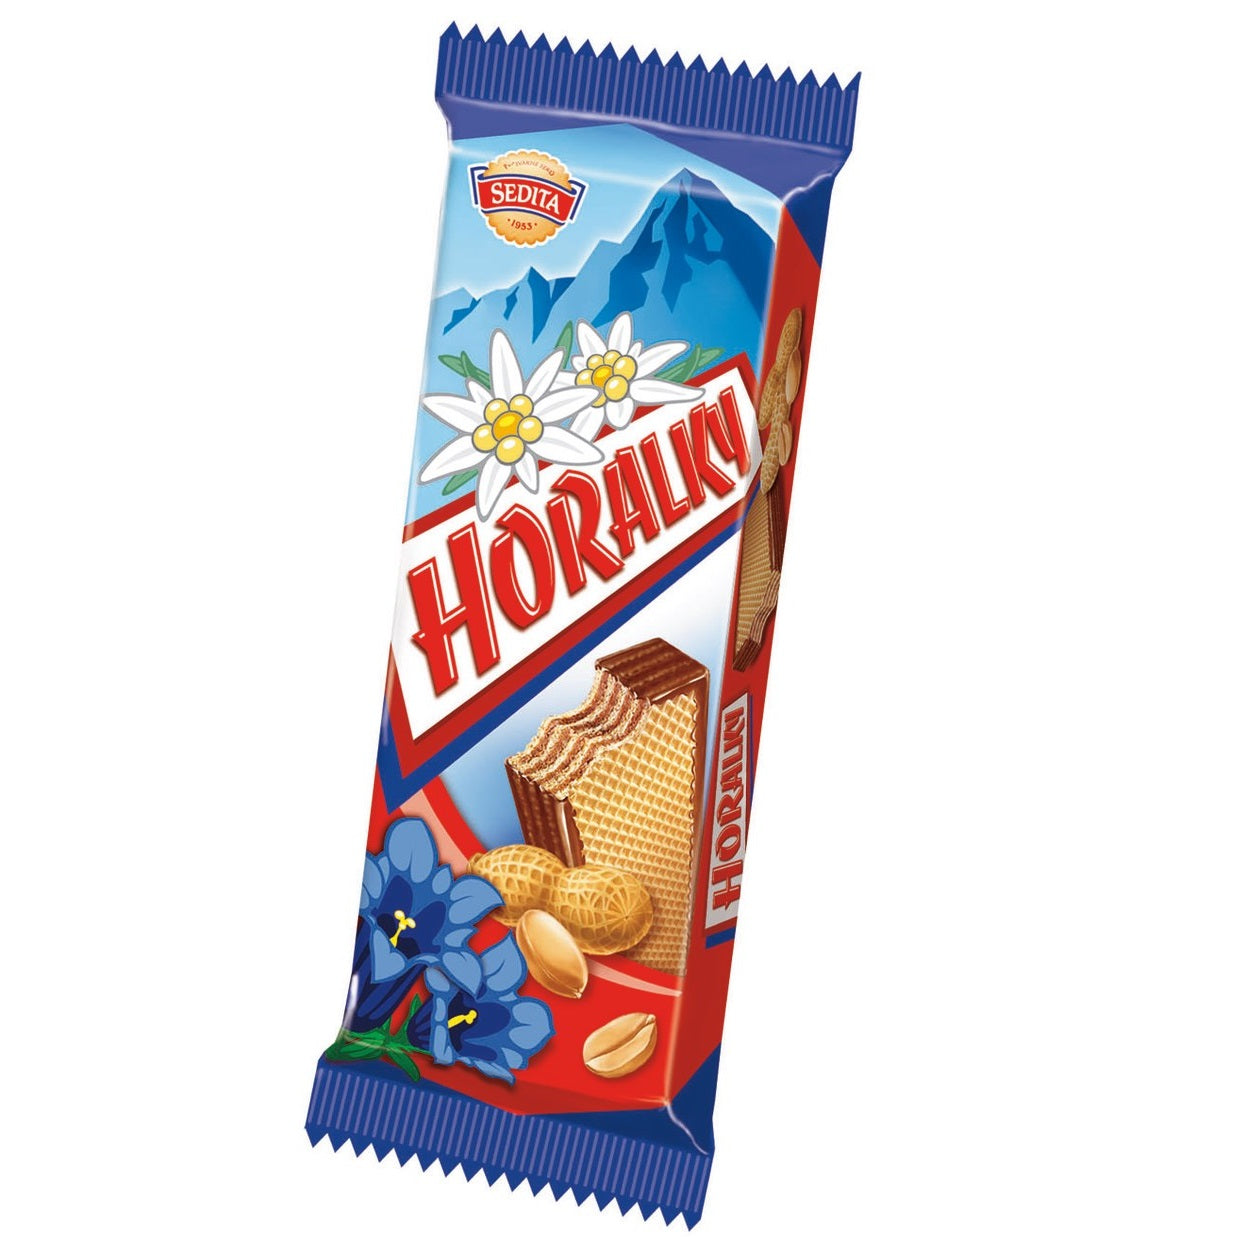 Sedita Horalky Crispy Wafers With Peanuts Cream Filling In Cocoa Coating